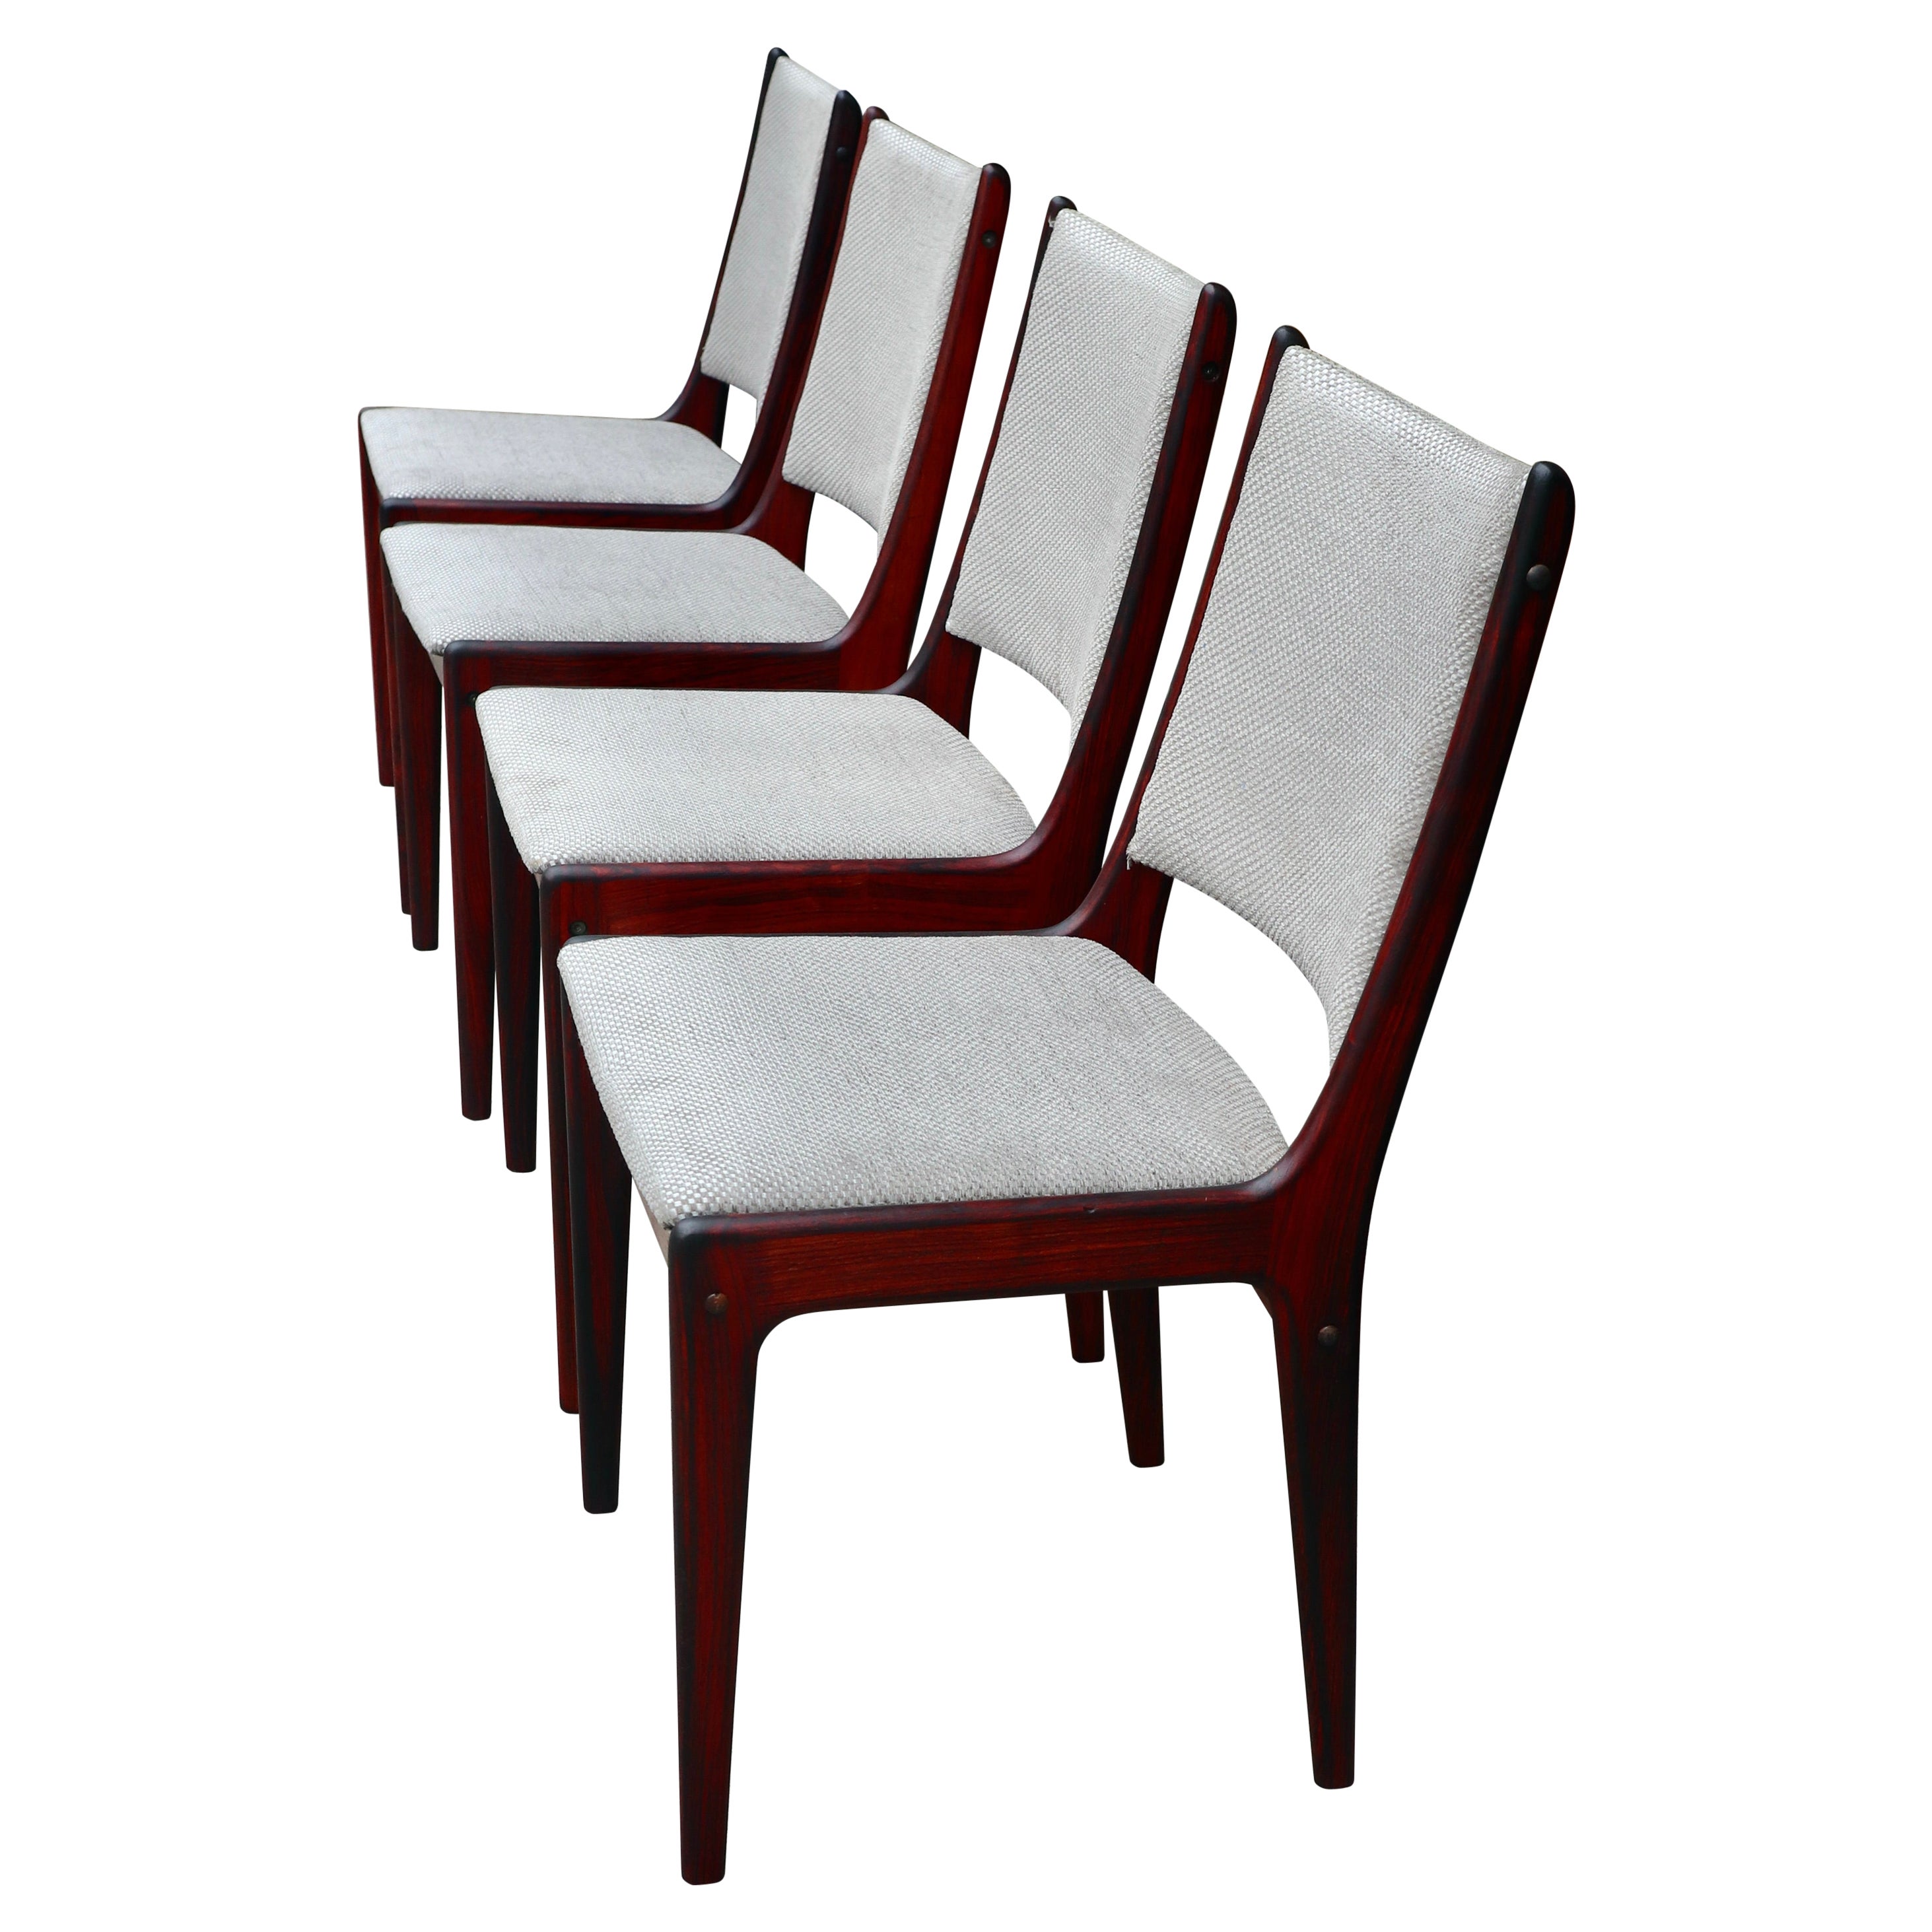 Four rosewood dining Chairs by Johannes Andersen for Uldum Møbelfabrik 1960s For Sale